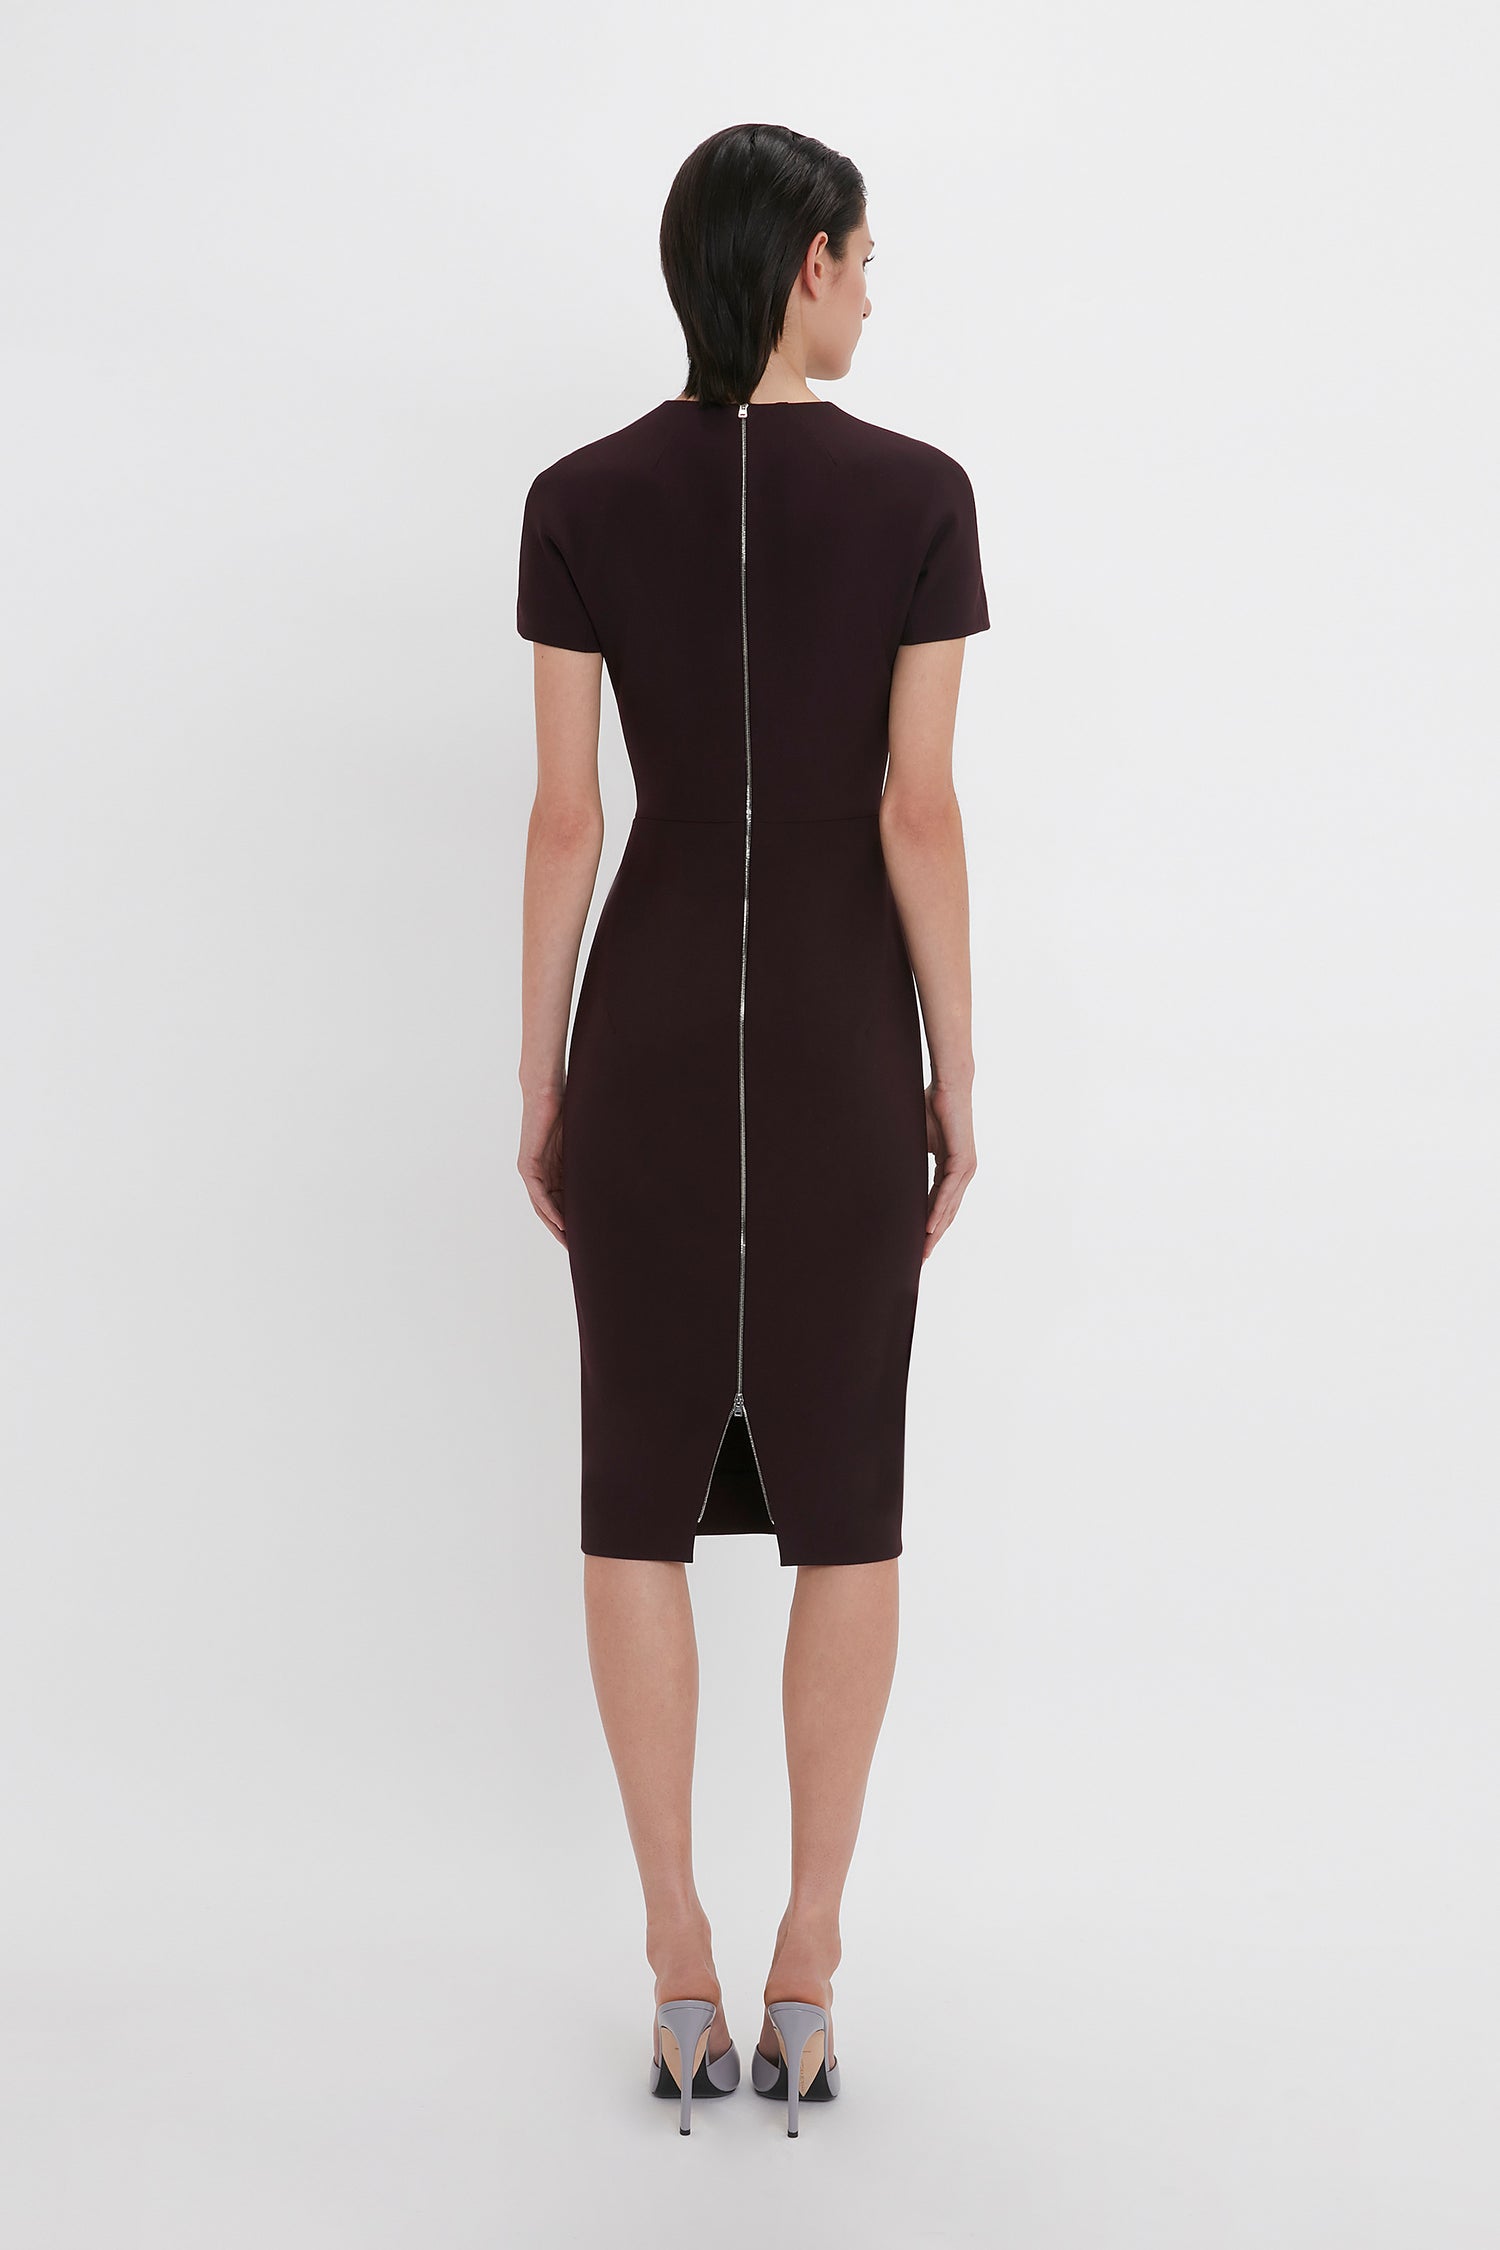 A person with short black hair is seen from the back, wearing a knee-length, short-sleeve Victoria Beckham Fitted T-Shirt Dress In Deep Mahogany with a visible zipper down the middle, and high-heeled shoes.